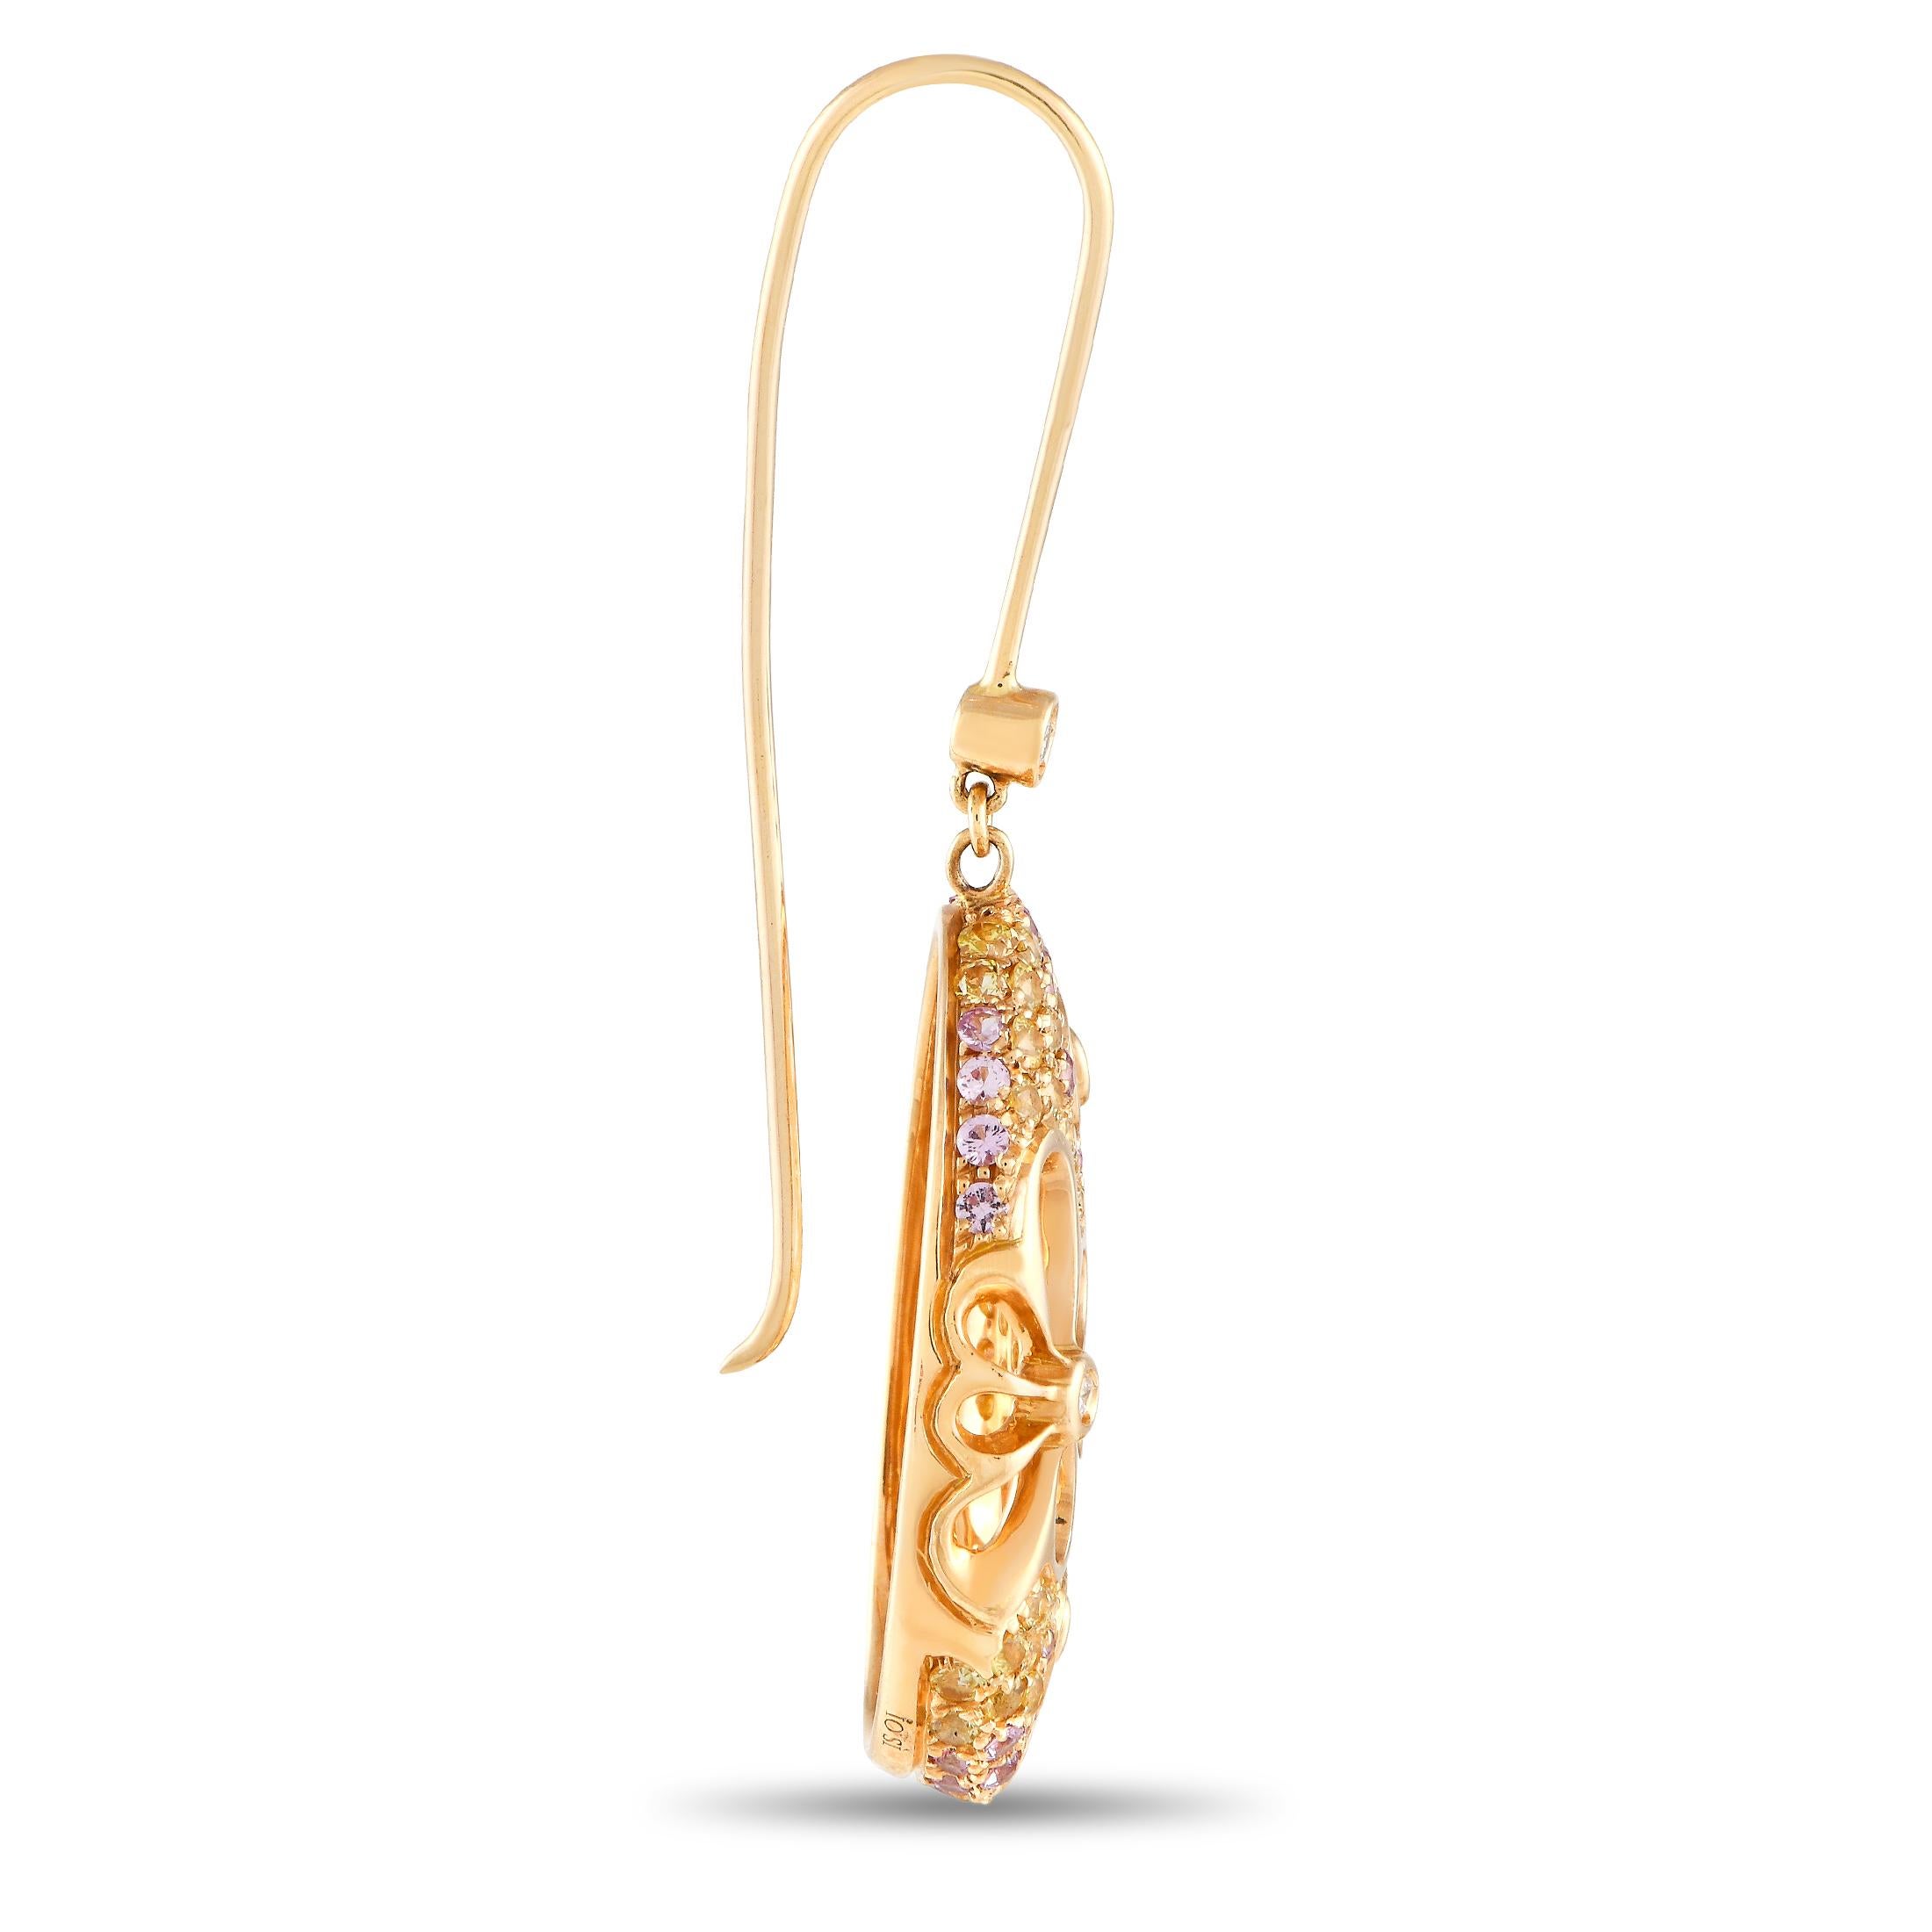 These Io Si earrings have an undeniable charm. Crafted from opulent 18K rose gold, each one measures 2.0” long, 0.75” wide, and includes dynamic cut-out floral motifs. Diamonds with a total weight of 0.19 carats make a statement at the center of the